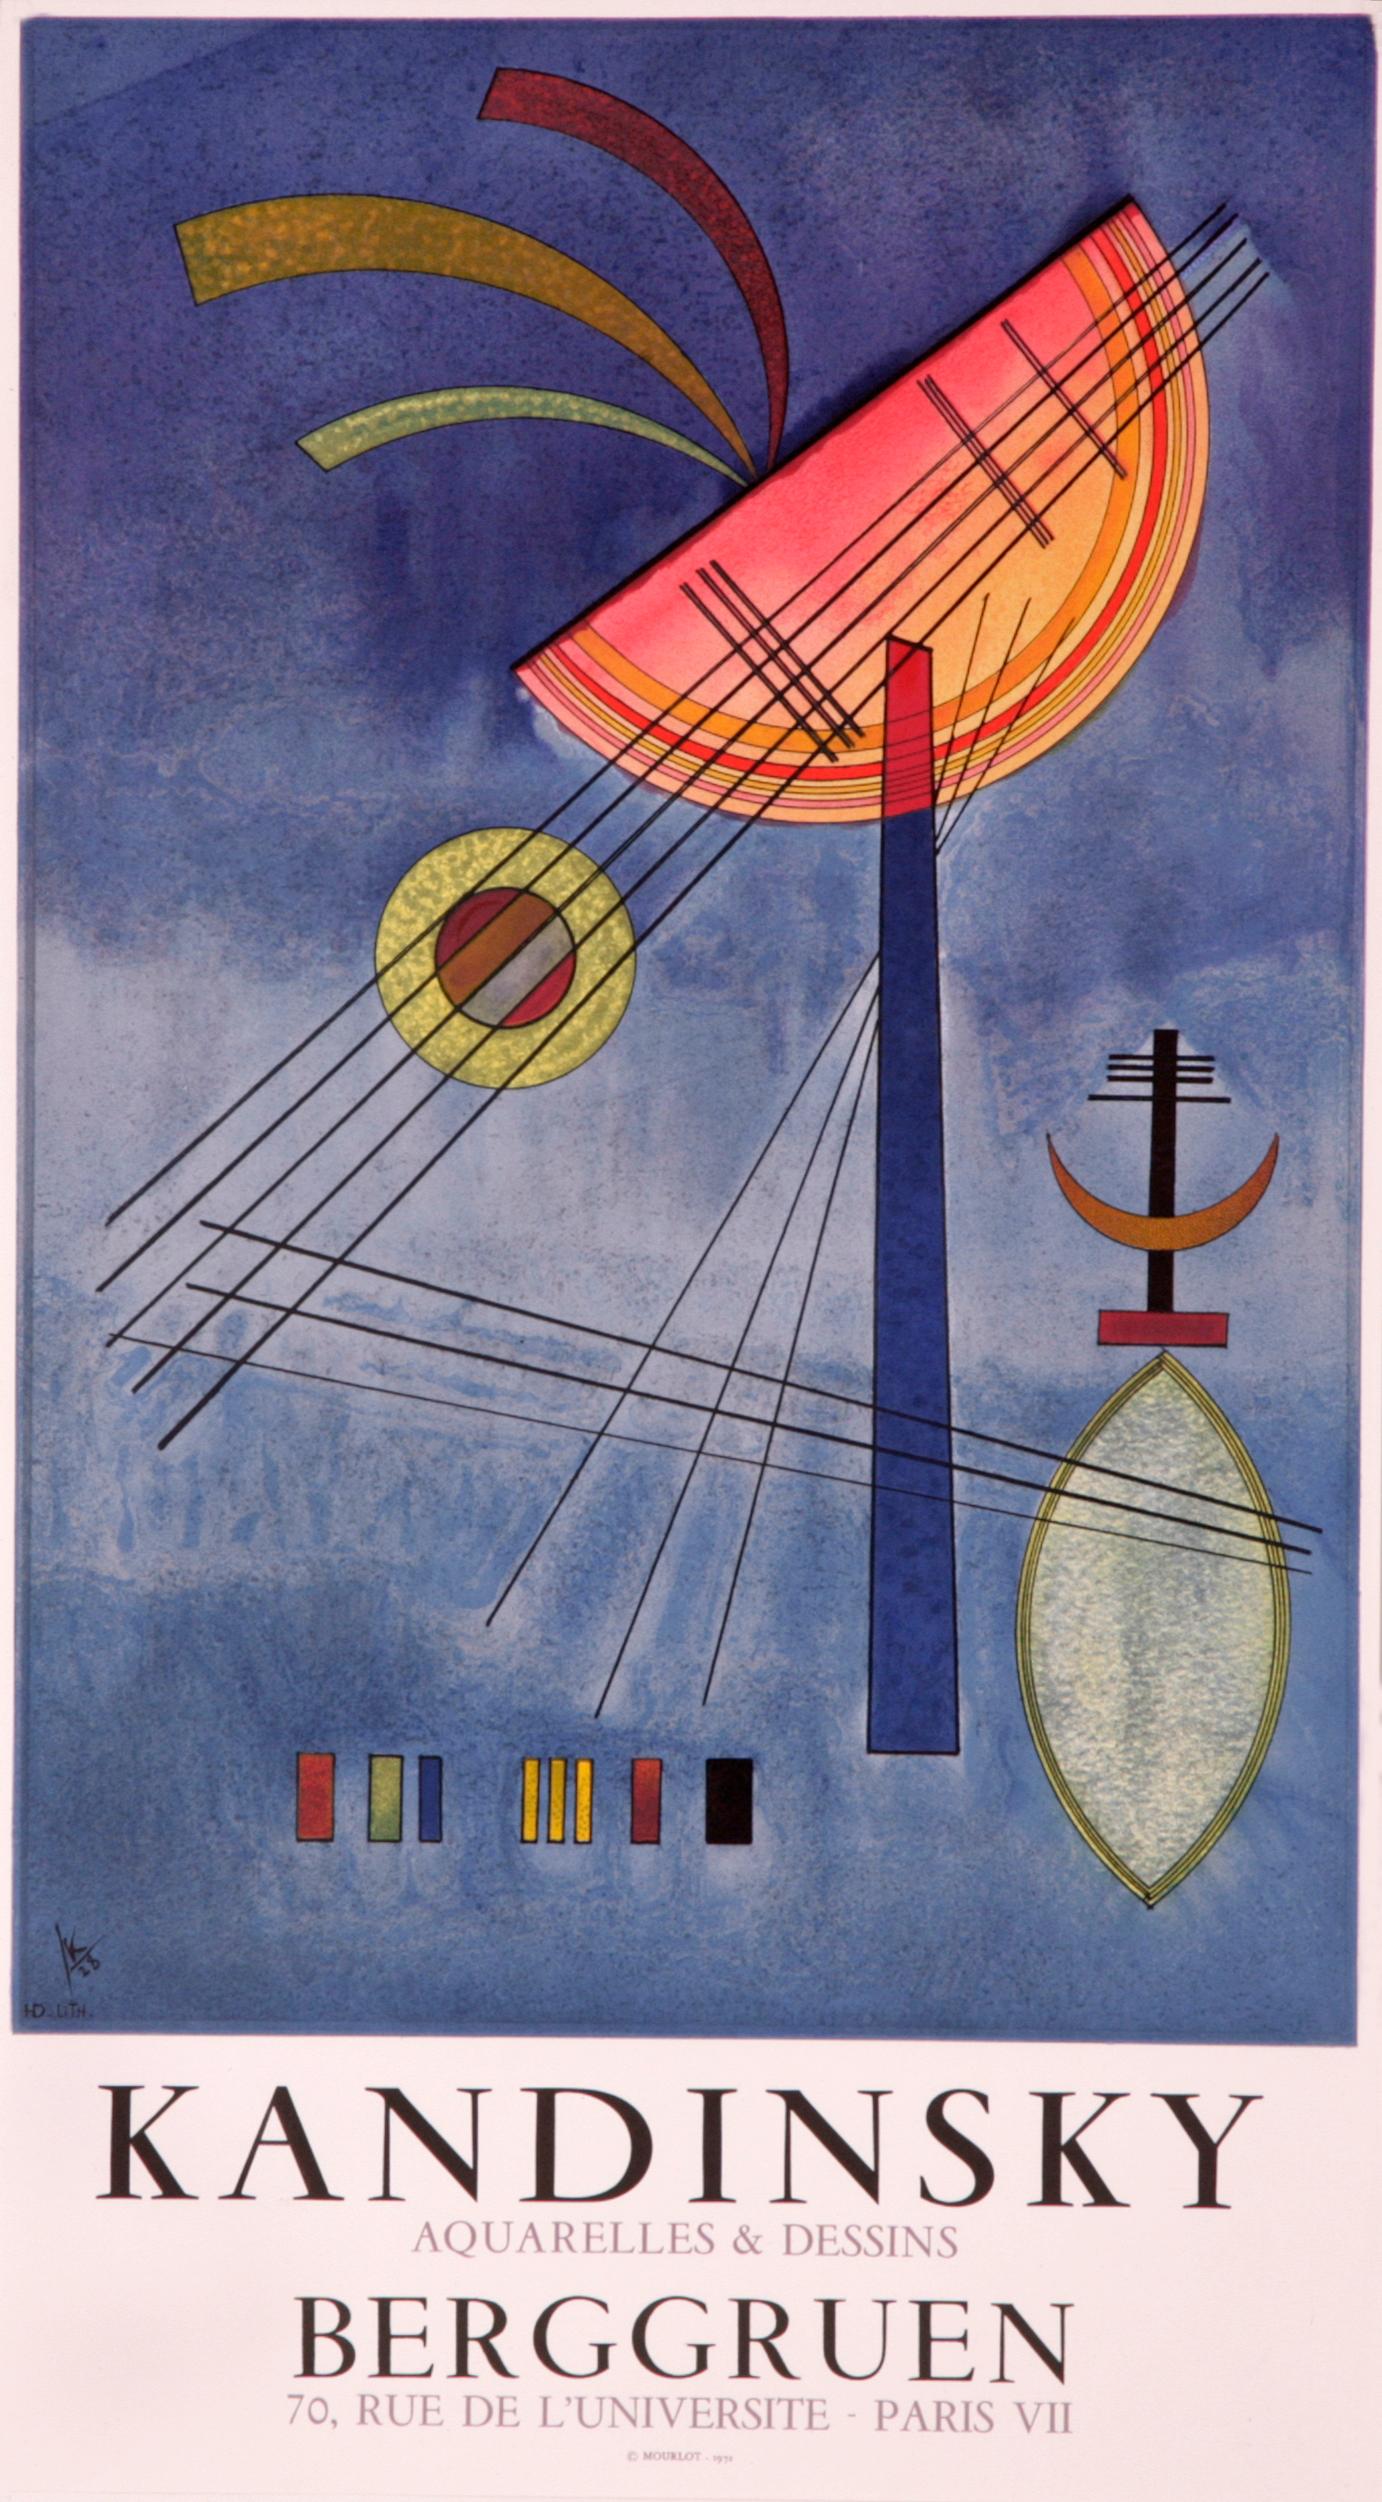 This colorful modern lithographic poster by Wassily Kandinsky was printed in 1972 at the Atelier Mourlot in Paris to promote an exhibition of his watercolors and drawings at the Galerie Berggruen in Paris. 

Certificate of Provenance: 
Each